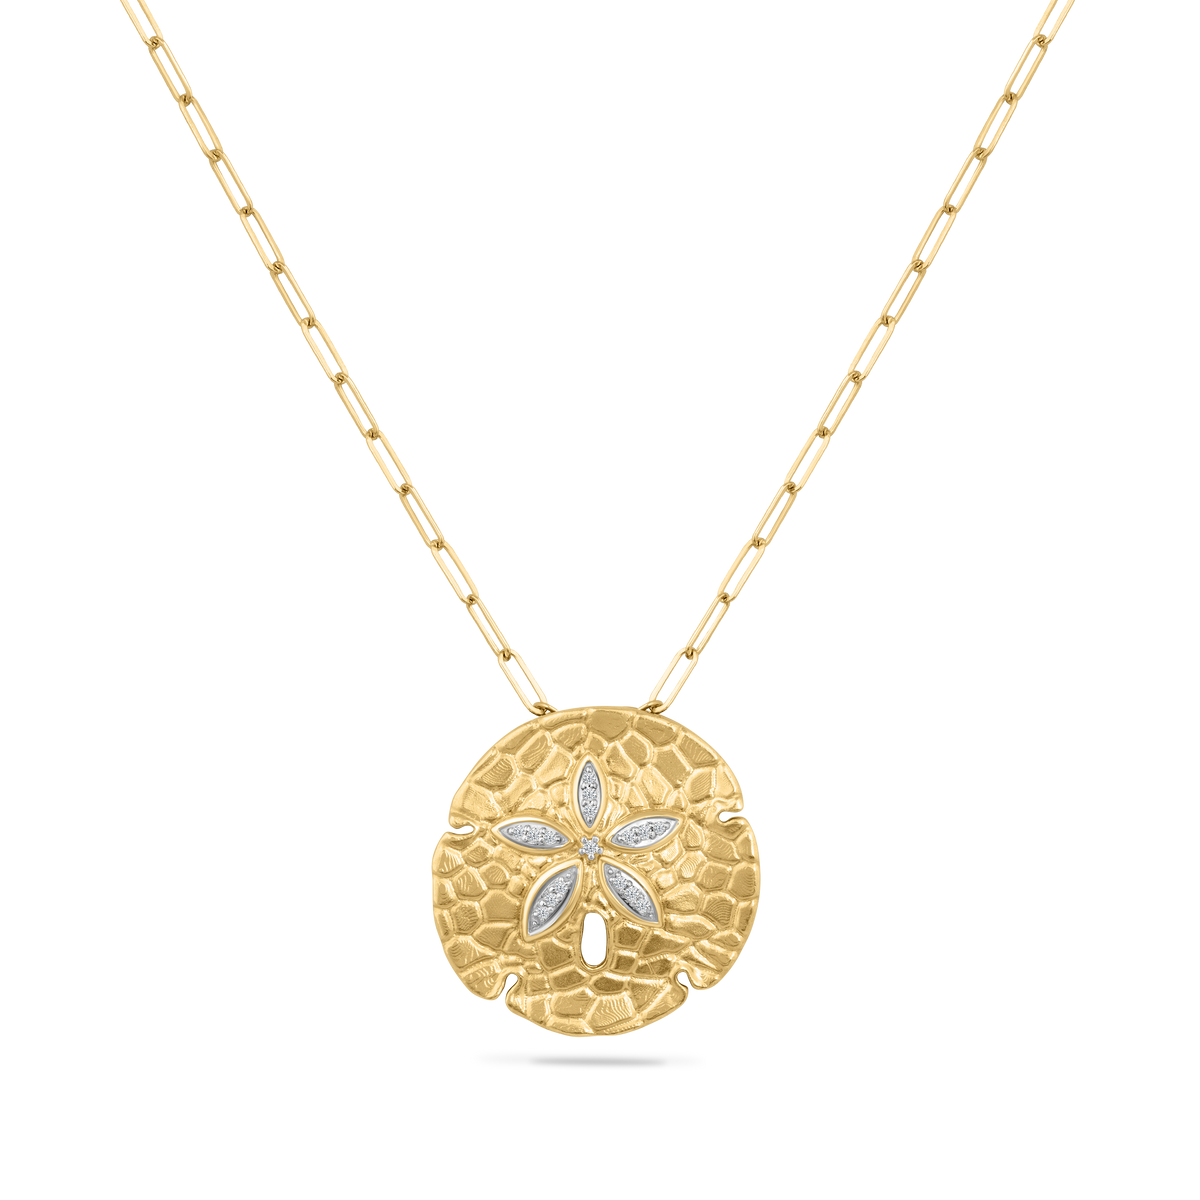 ﻿14KY SAND DOLLAR PENDANT WITH 16 DIAMONDS 0.09CT ON 18 INCHES CABLE CHAIN